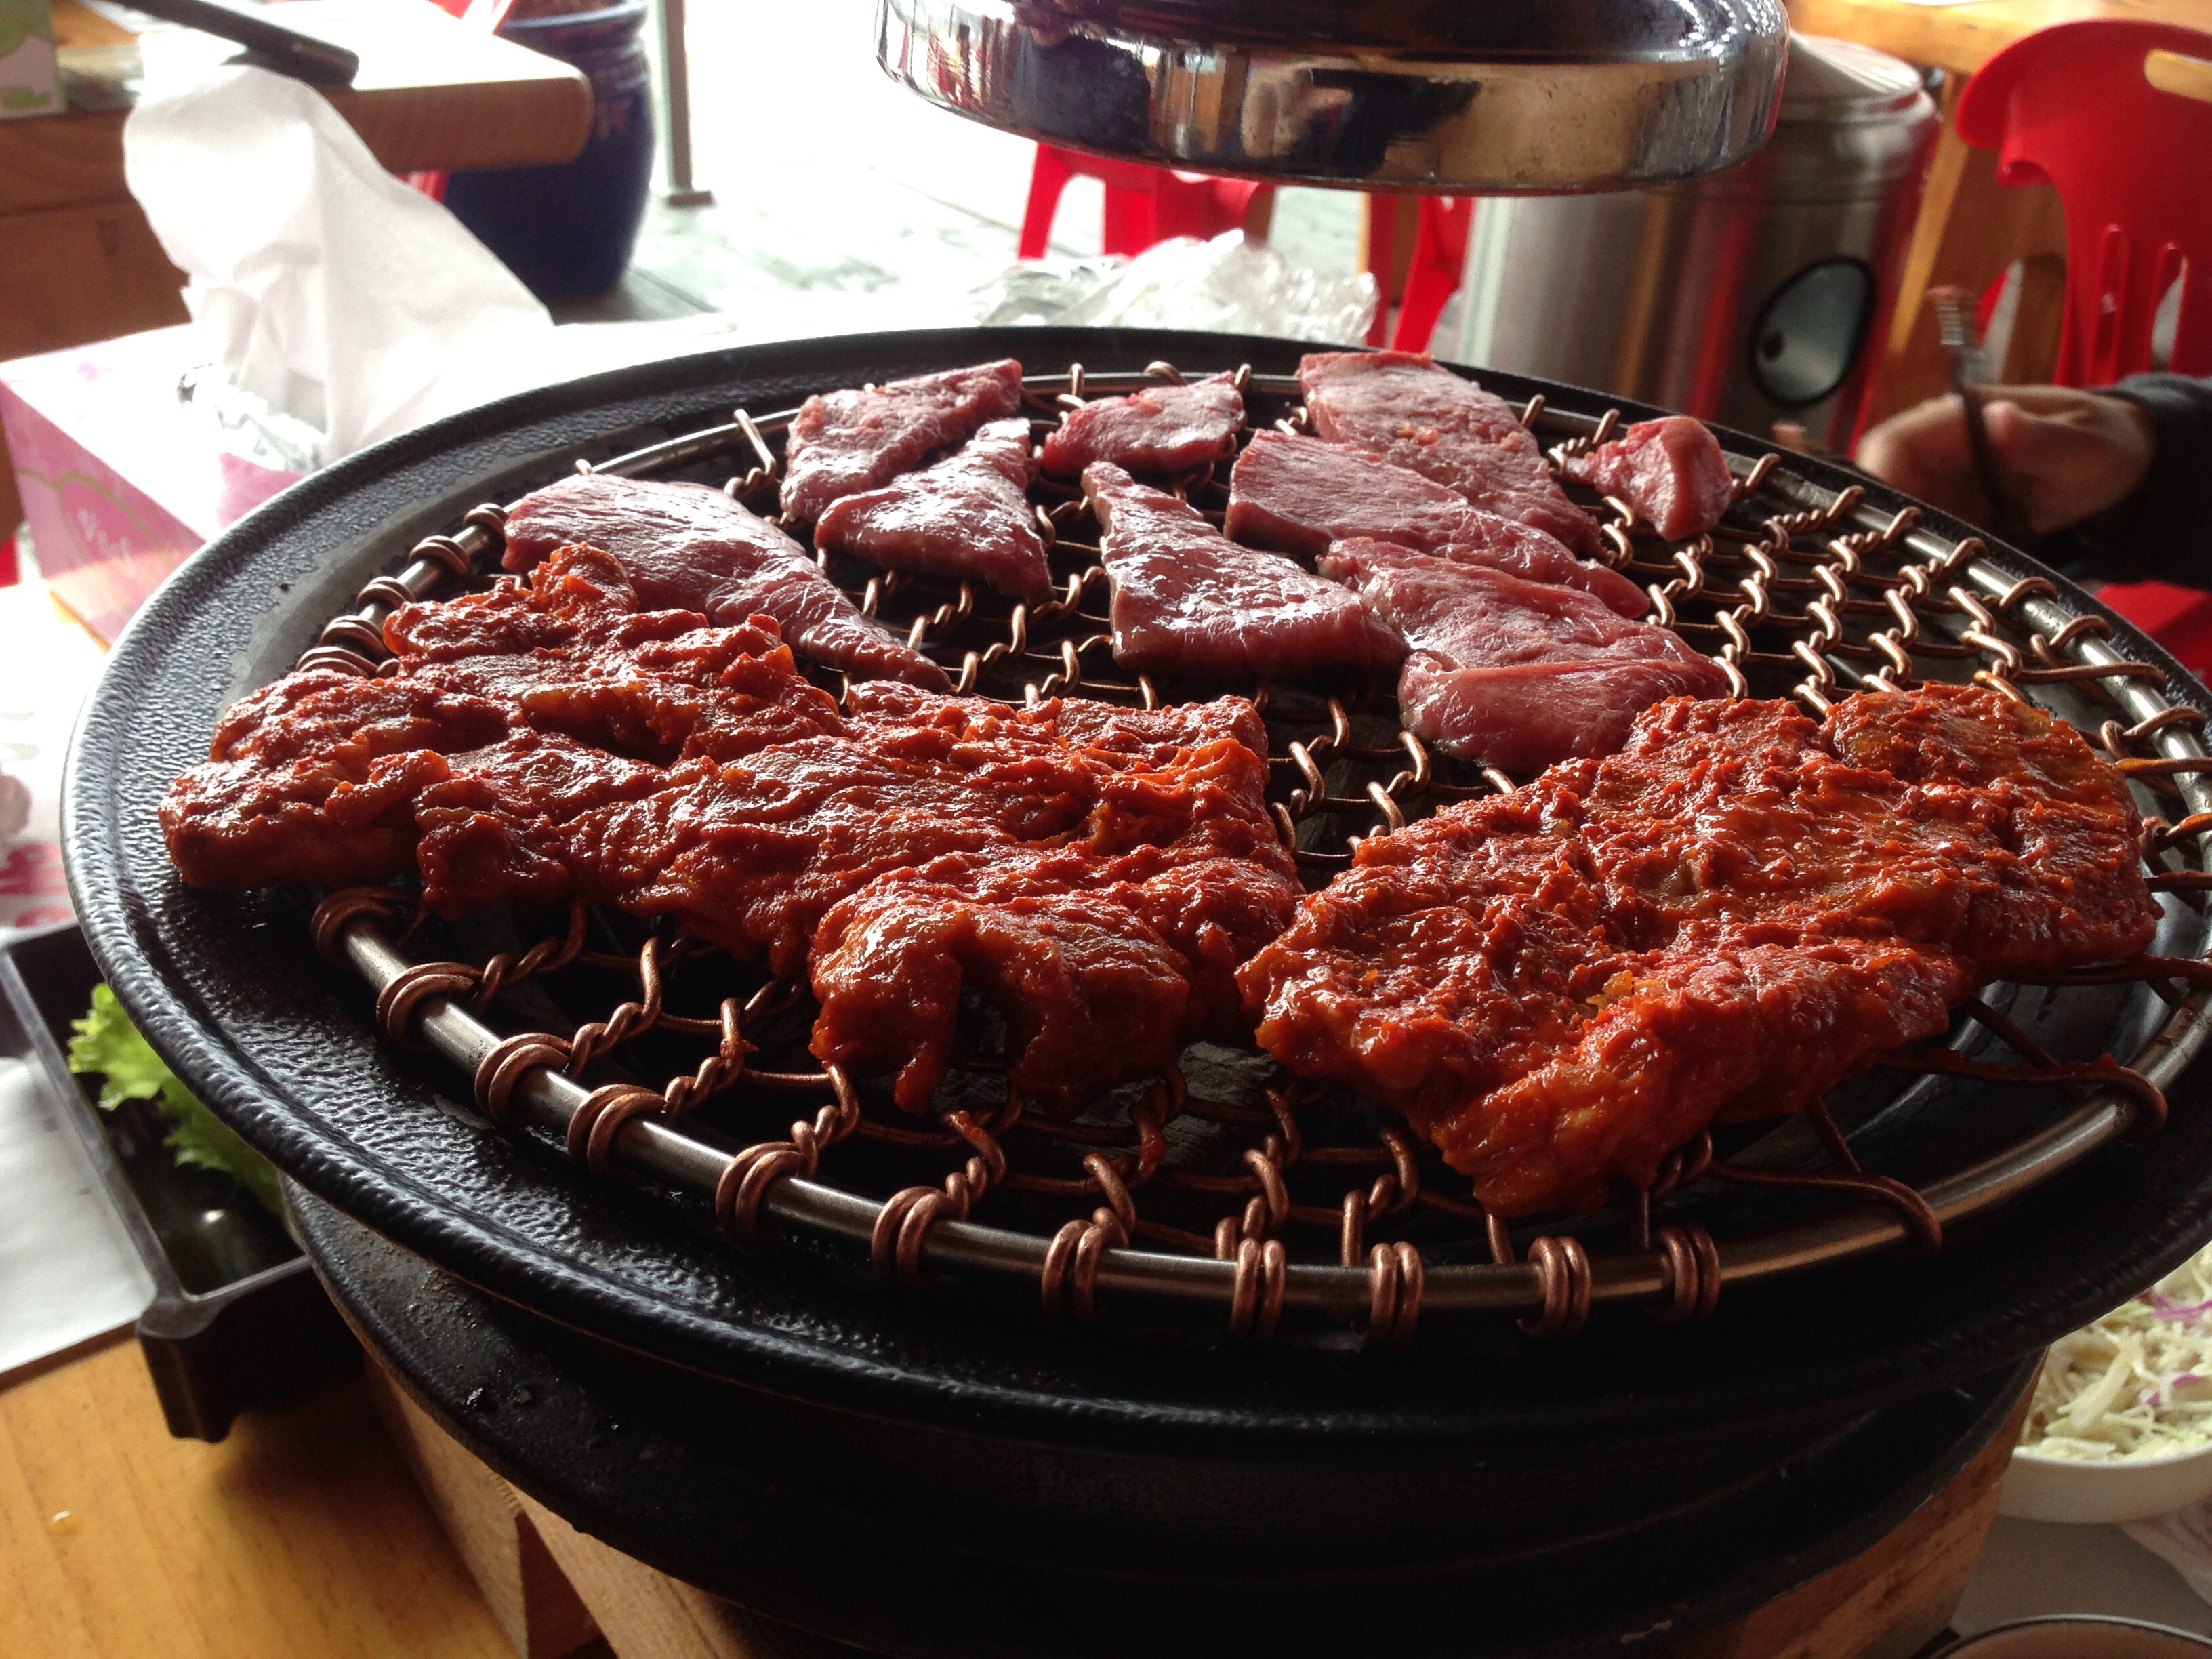 Korean table top barbecue, topped with marinated meats.